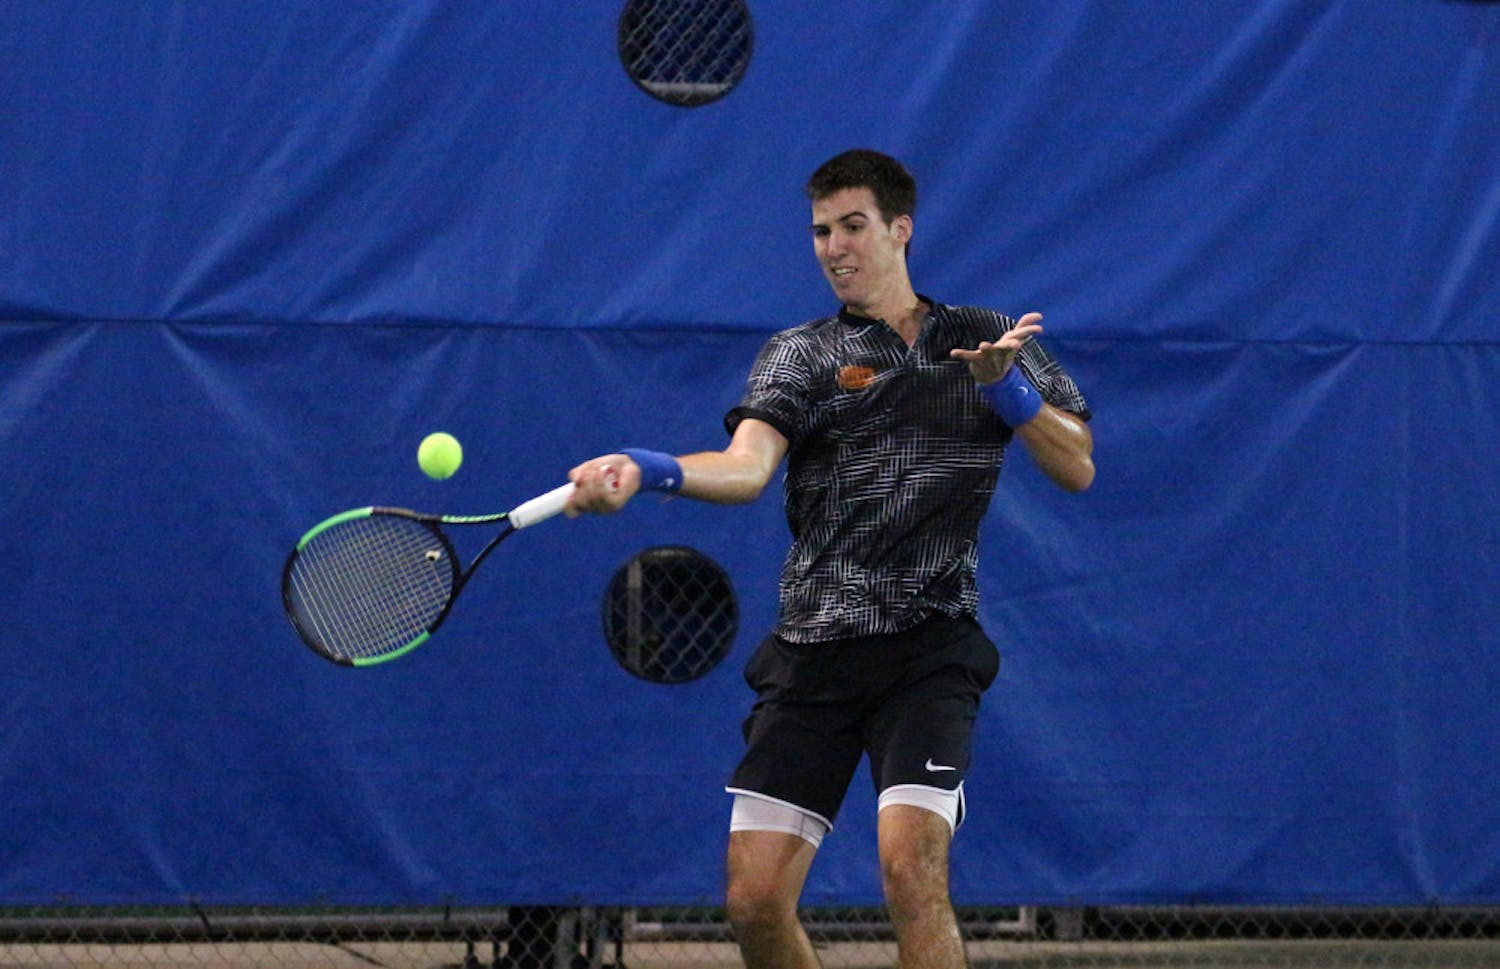 Junior Alfredo Perez advanced to the round of 16 in the NCAA Individual Men's Tennis Championships.